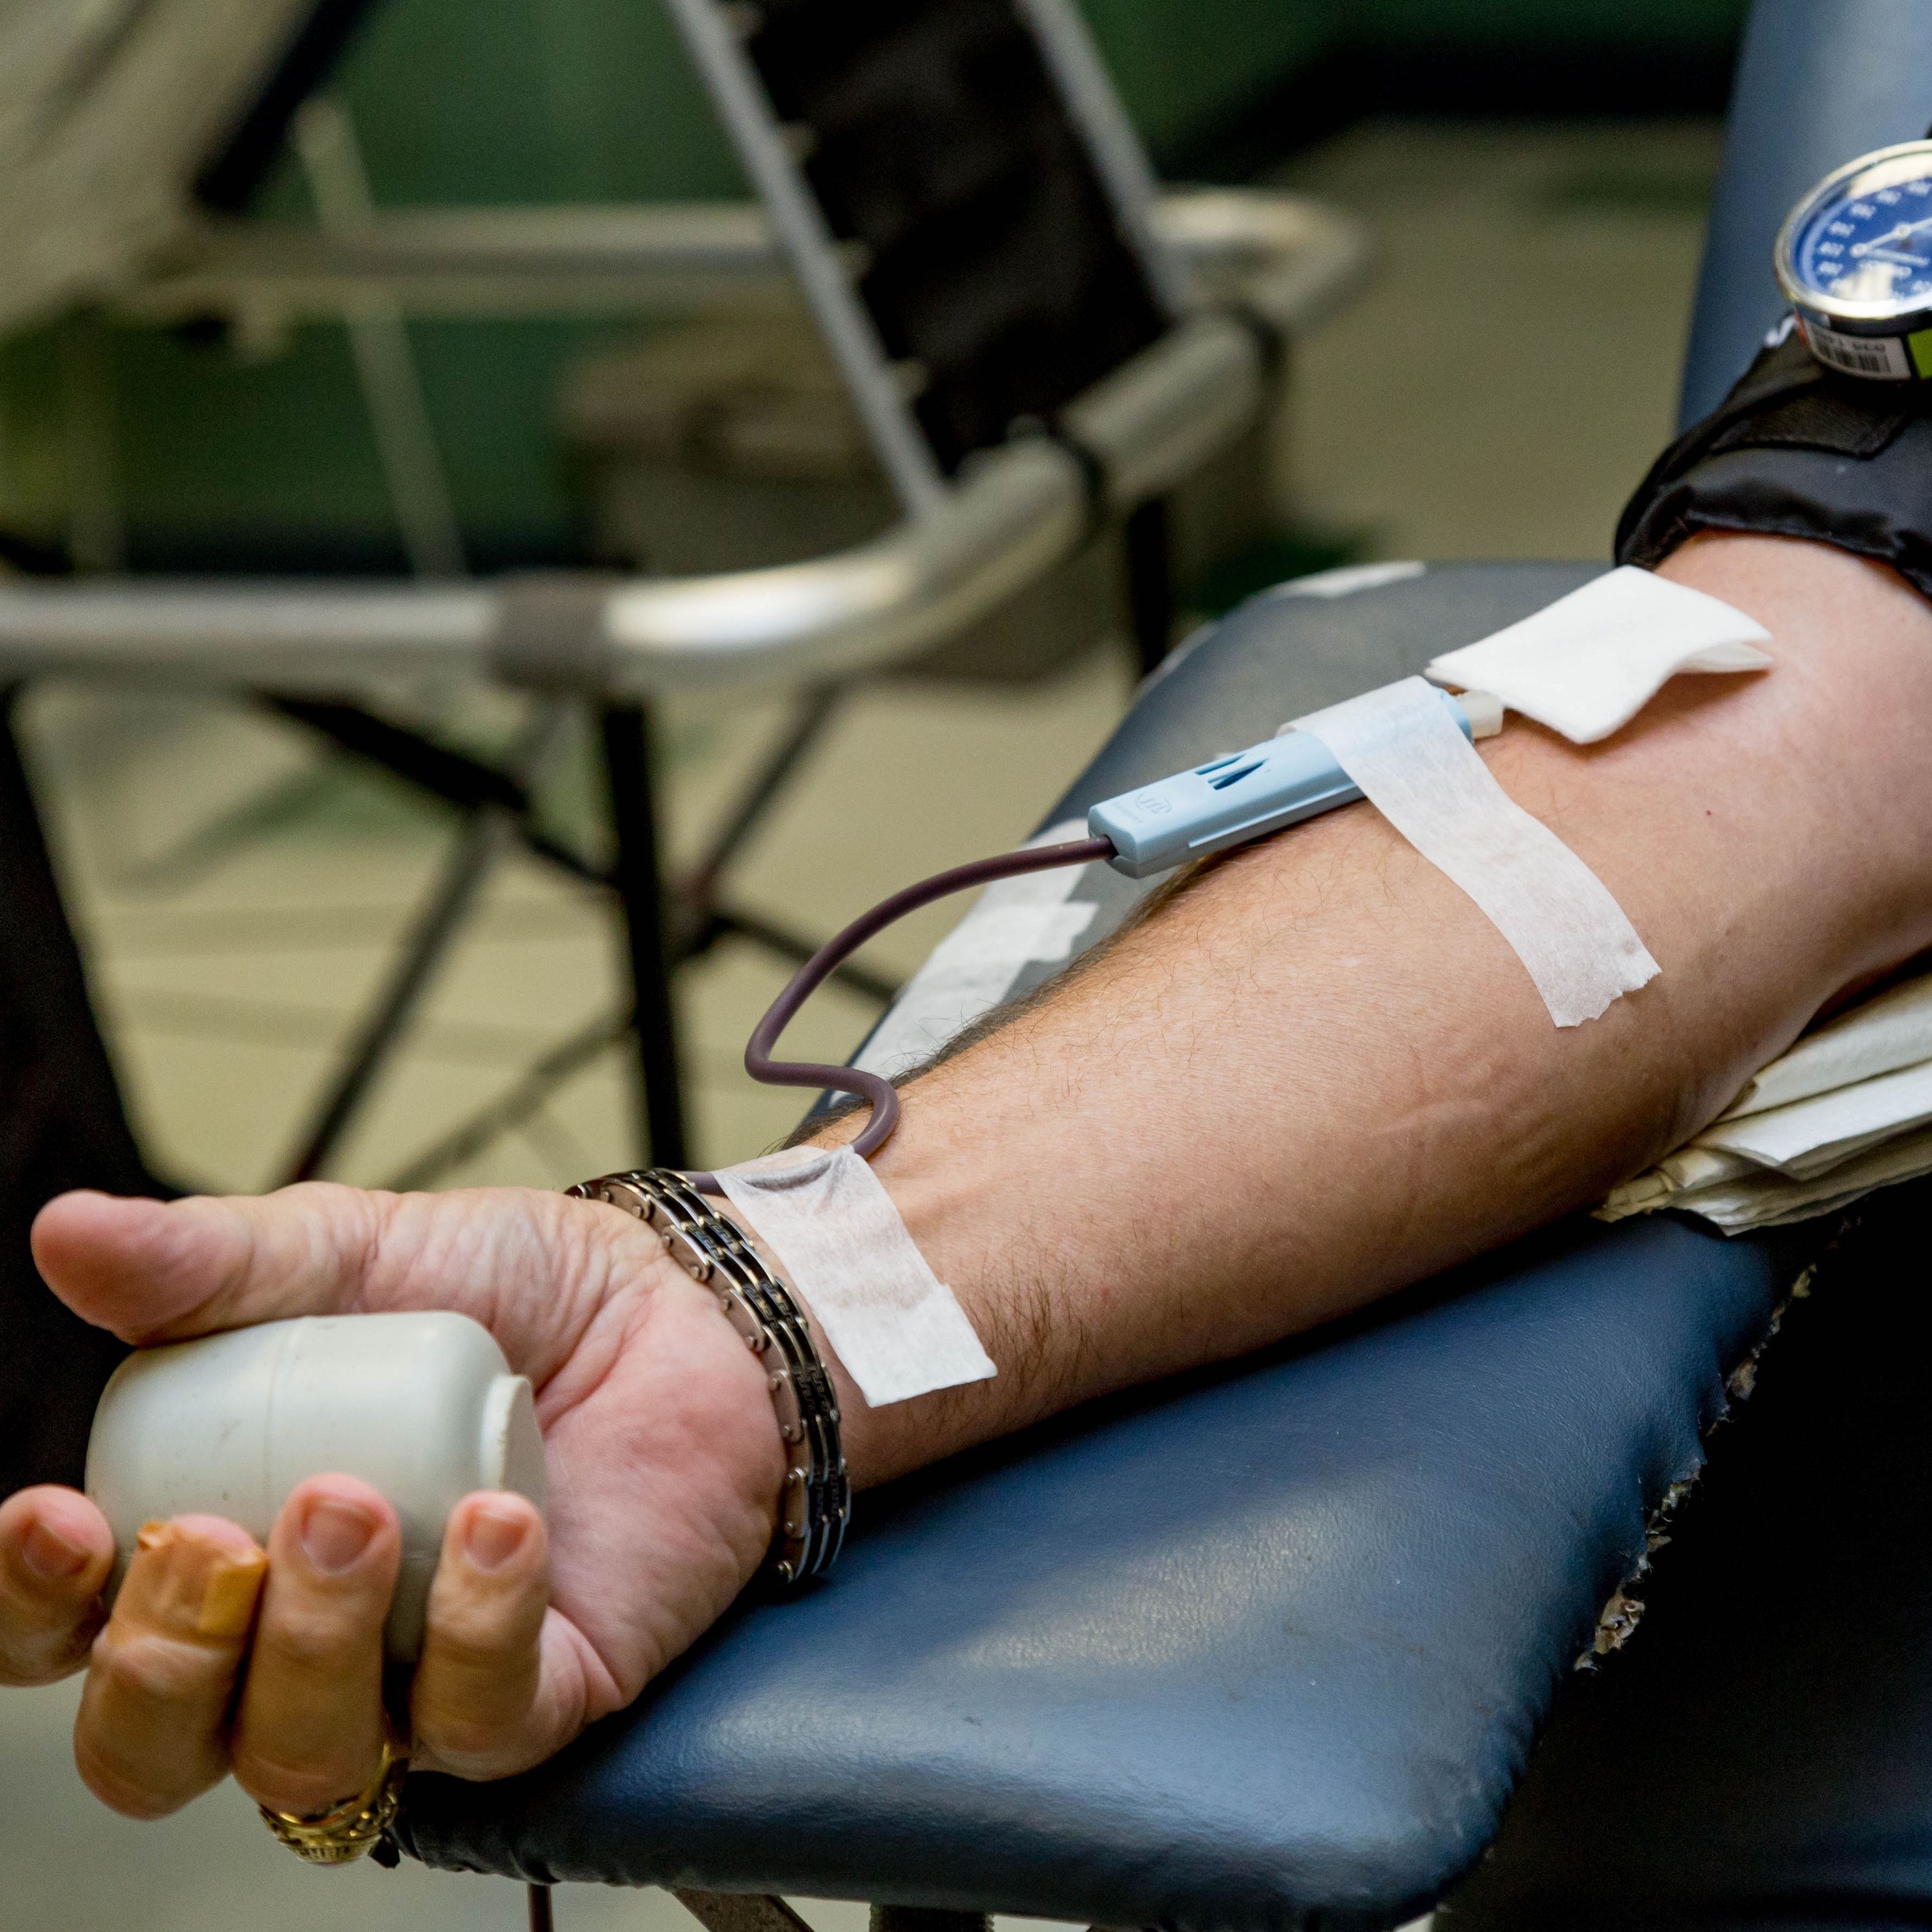 The FDA's Blood Donor Amendment for MSM is a Correction, not a Victory